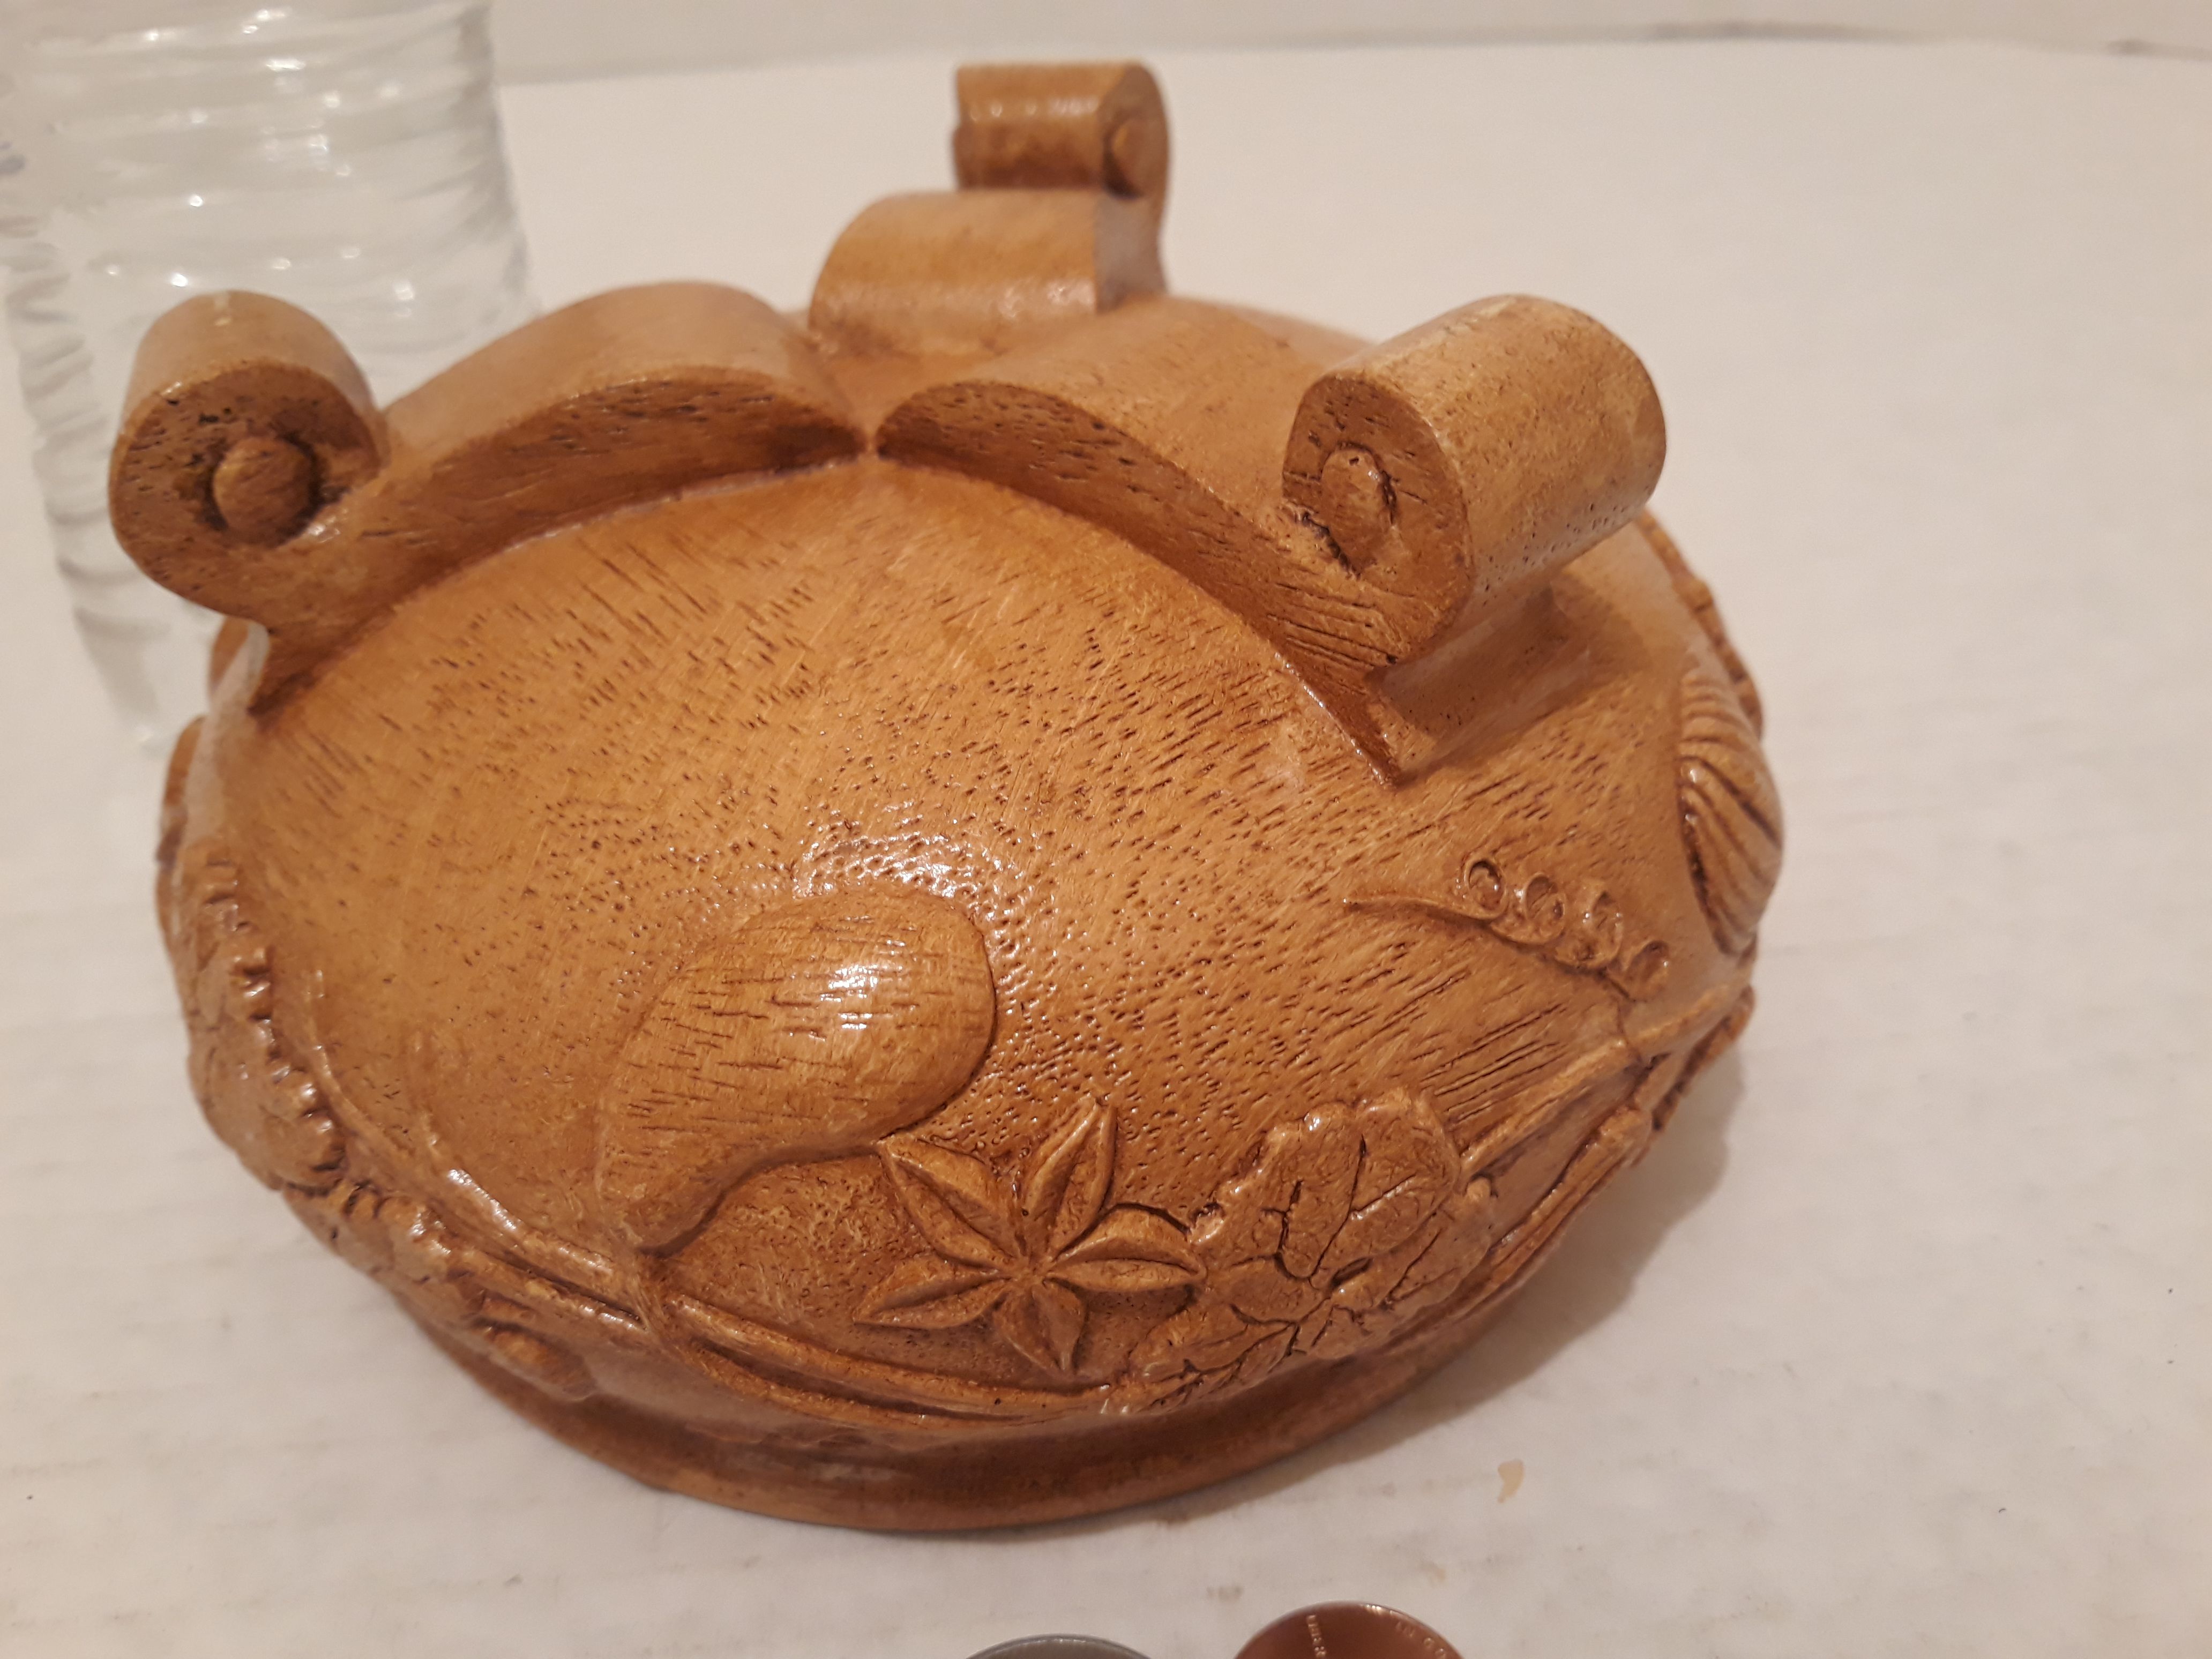 Vintage Nut Bowl, Snack Bowl with Claw Foot Legs, 6" Wide, Made in USA, Table Decor, Kitchen Display, Shelf Display, Nice Carved Side